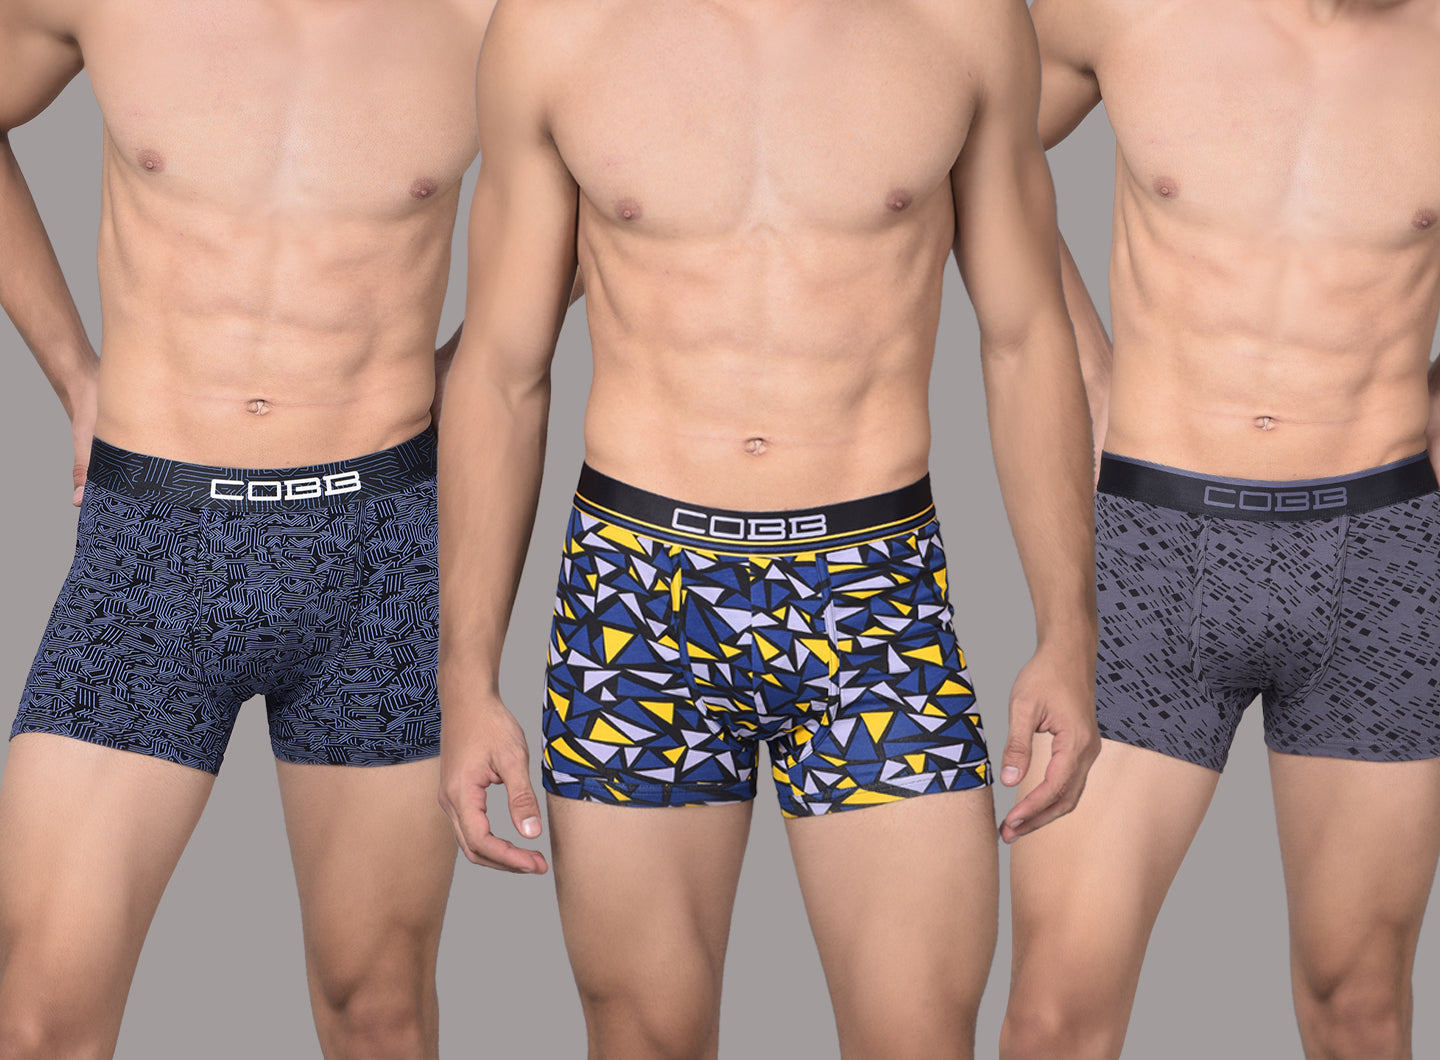 Cobb Mens Cotton Assorted Printed Premium Trunk (Pack of 3) Assorted